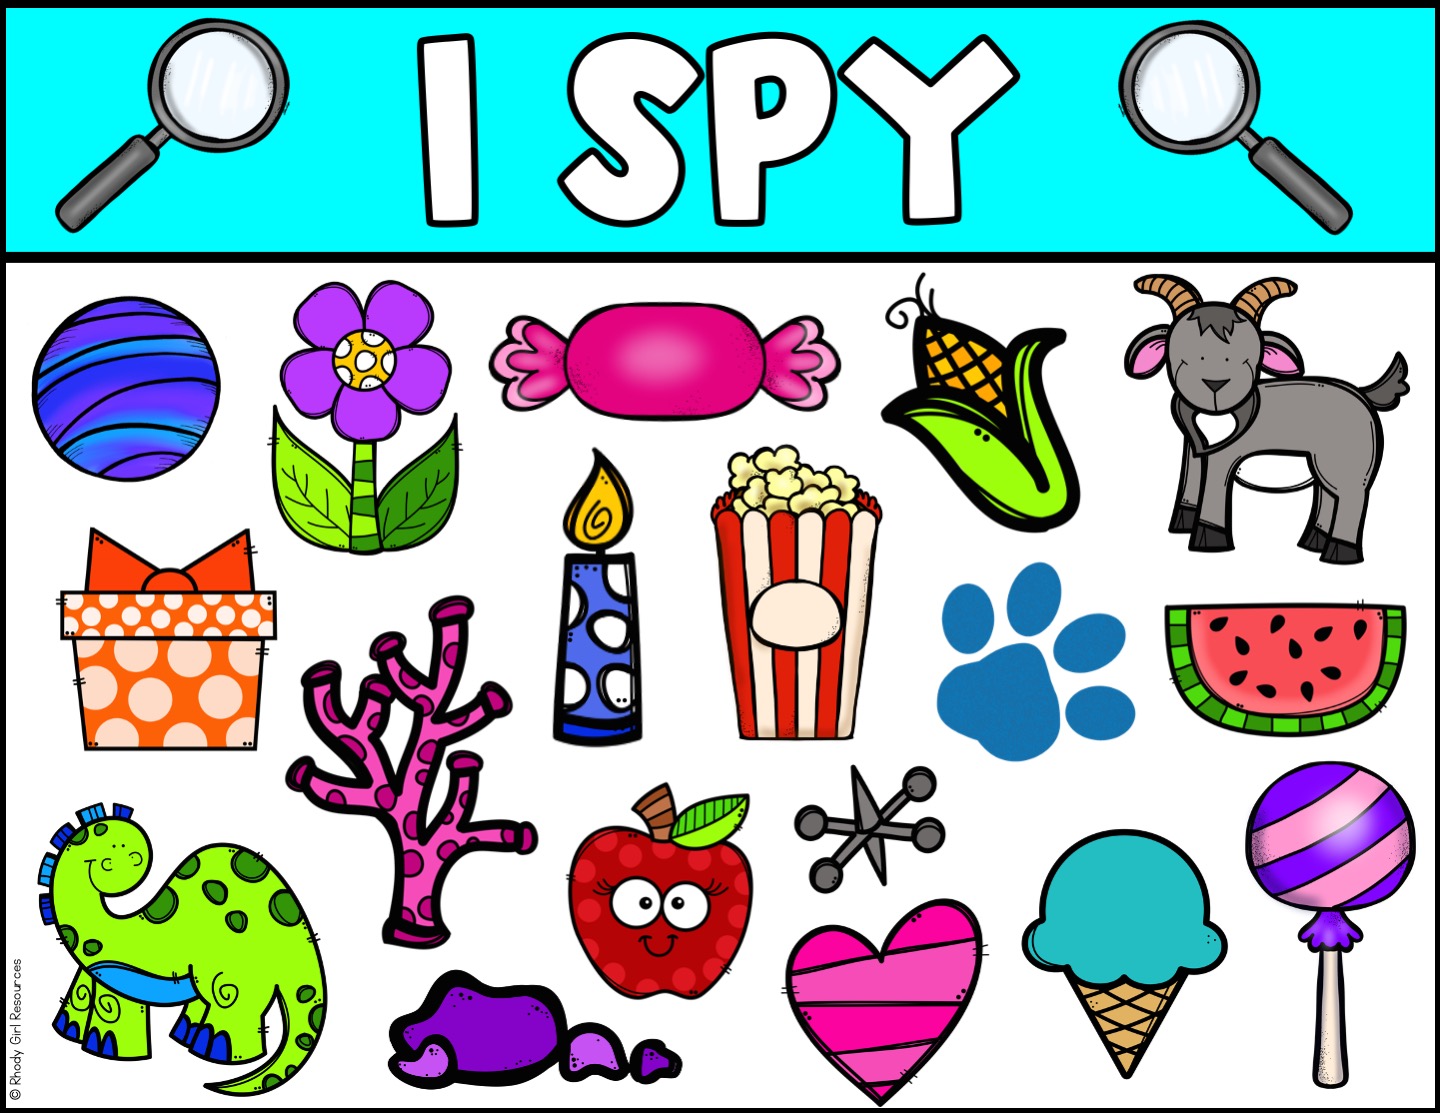 I Spy Free Games online for kids in Nursery by Brian Alejandro Gil